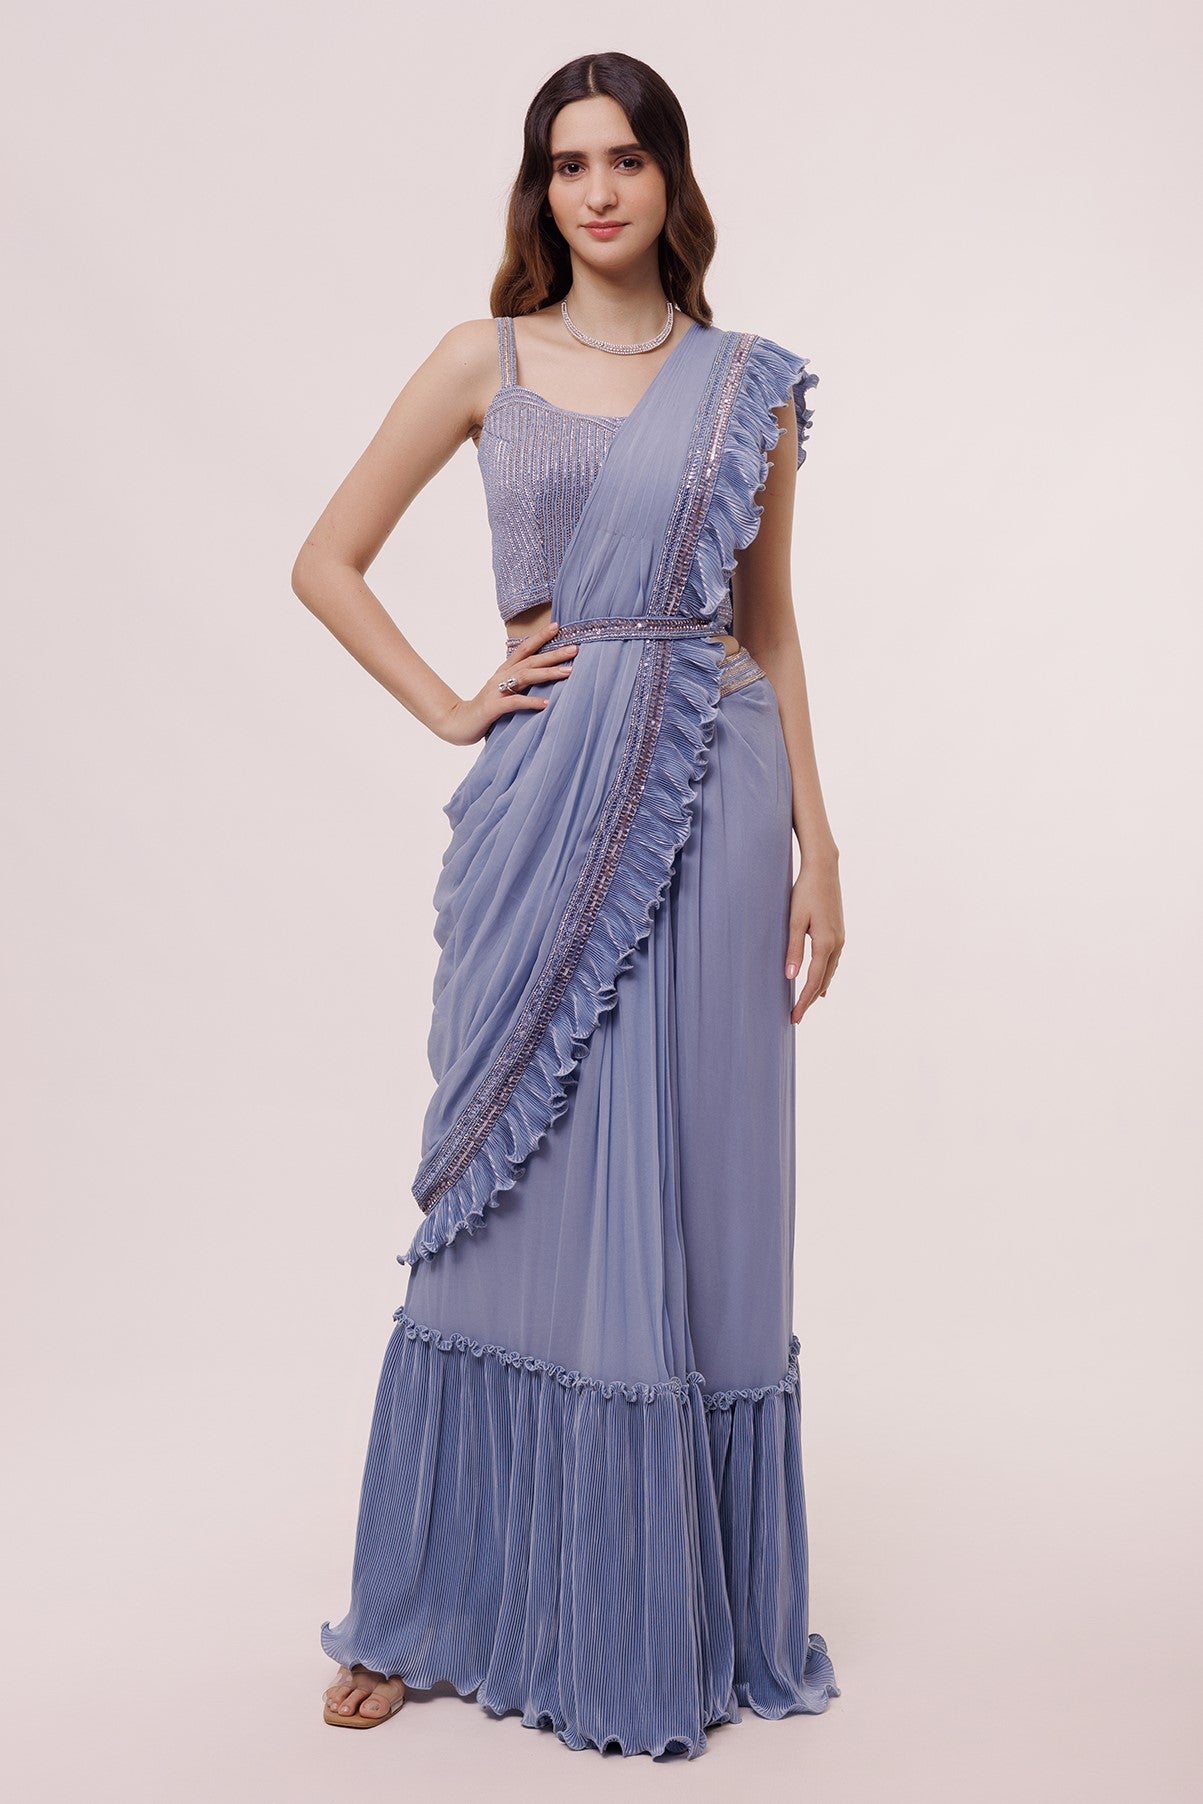 Pre-Draped Ruffle Saree with Blouse | Saree trends, Saree designs party  wear, Party wear indian dresses